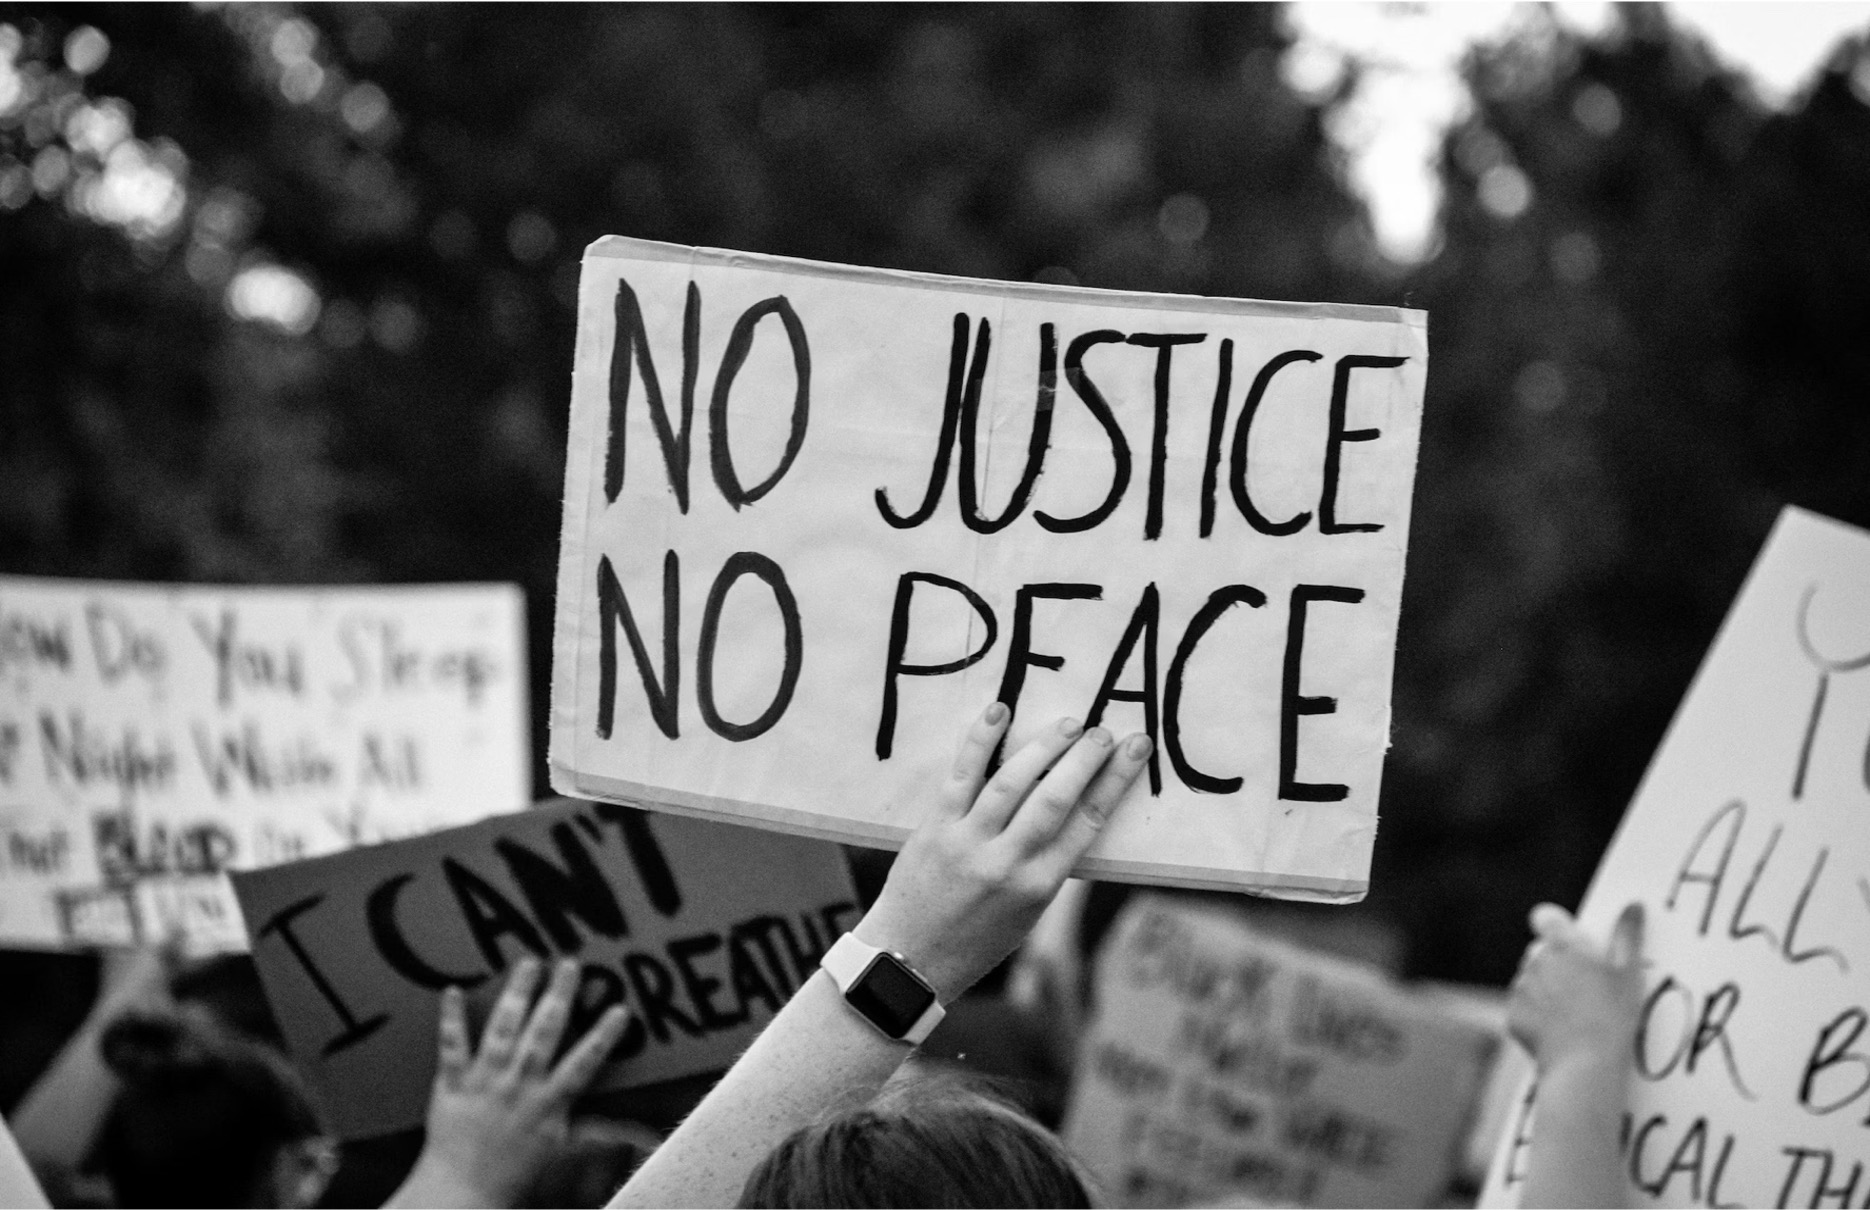 Editorial image of protests with sign that reads No Justice, No peace